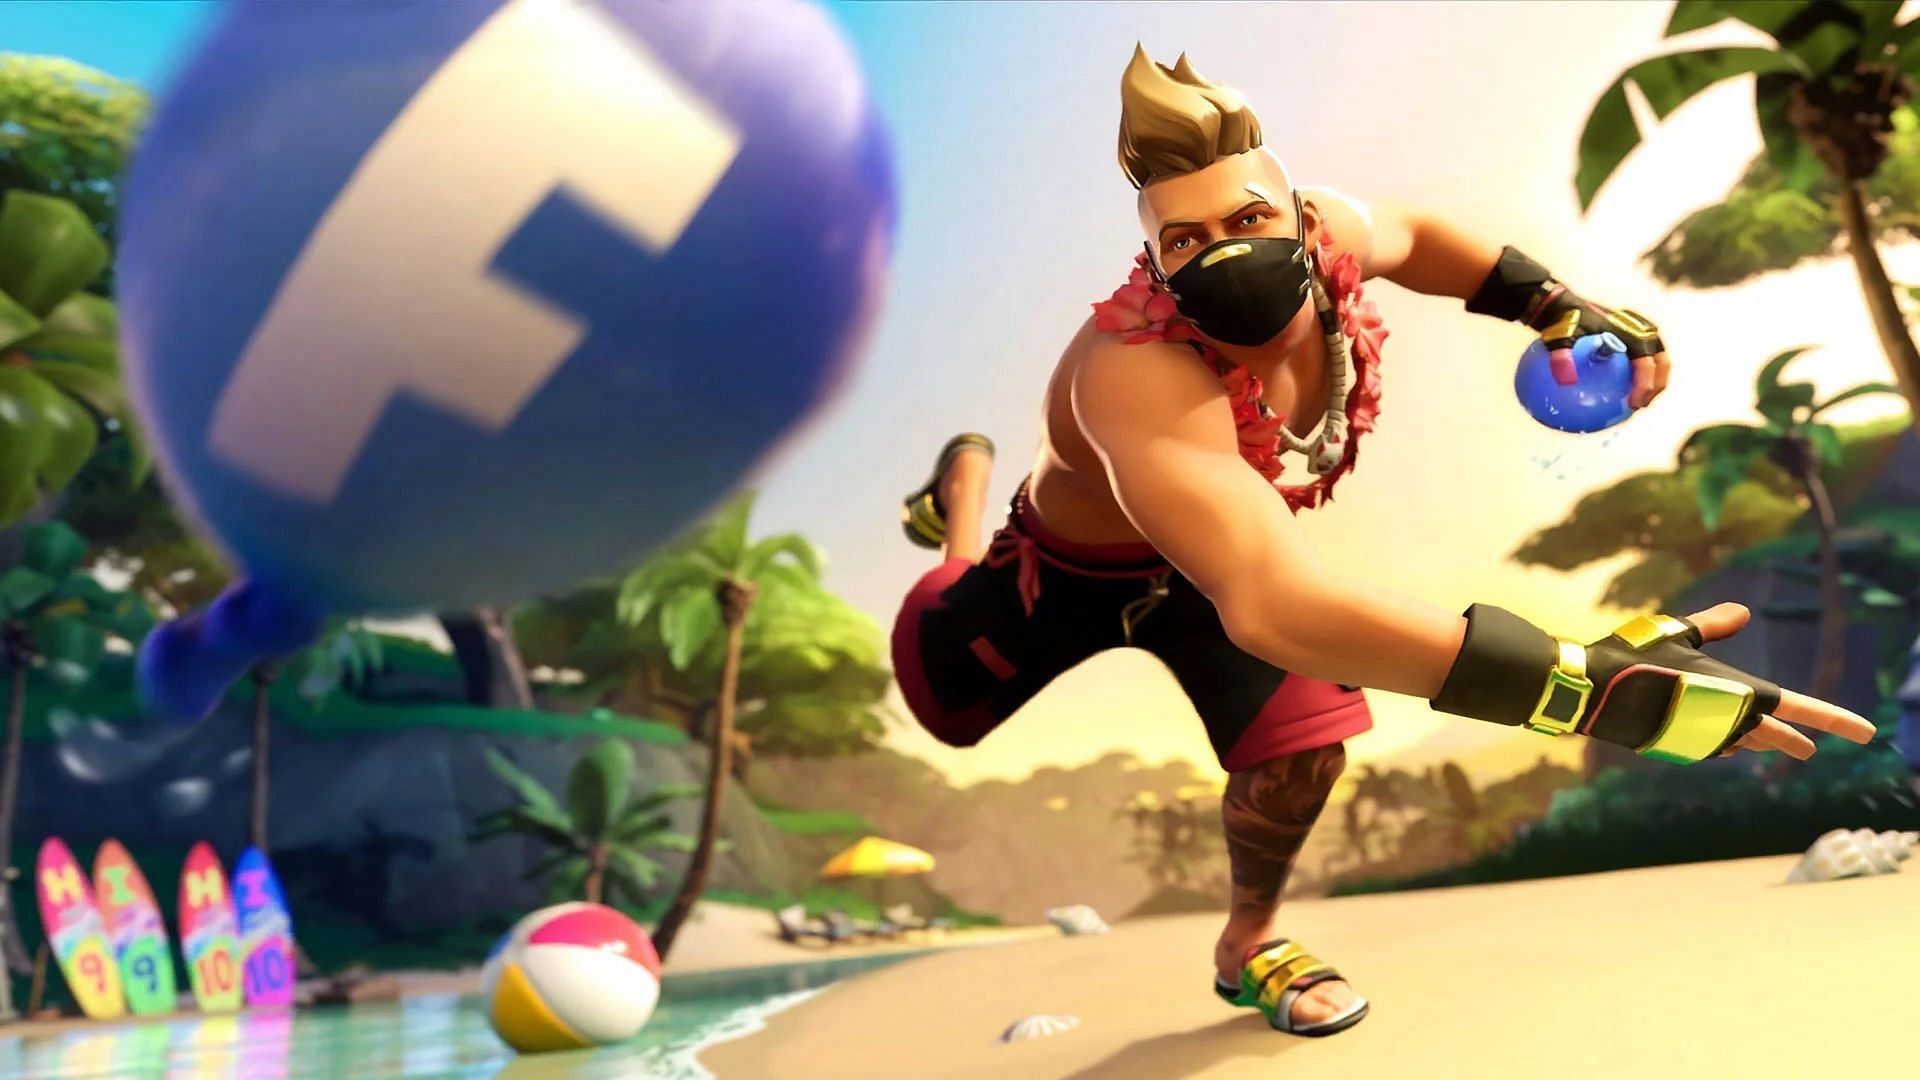 Epic Games has released numerous Fortnite Summer Quests so far in 2022 (Image via Epic Games)